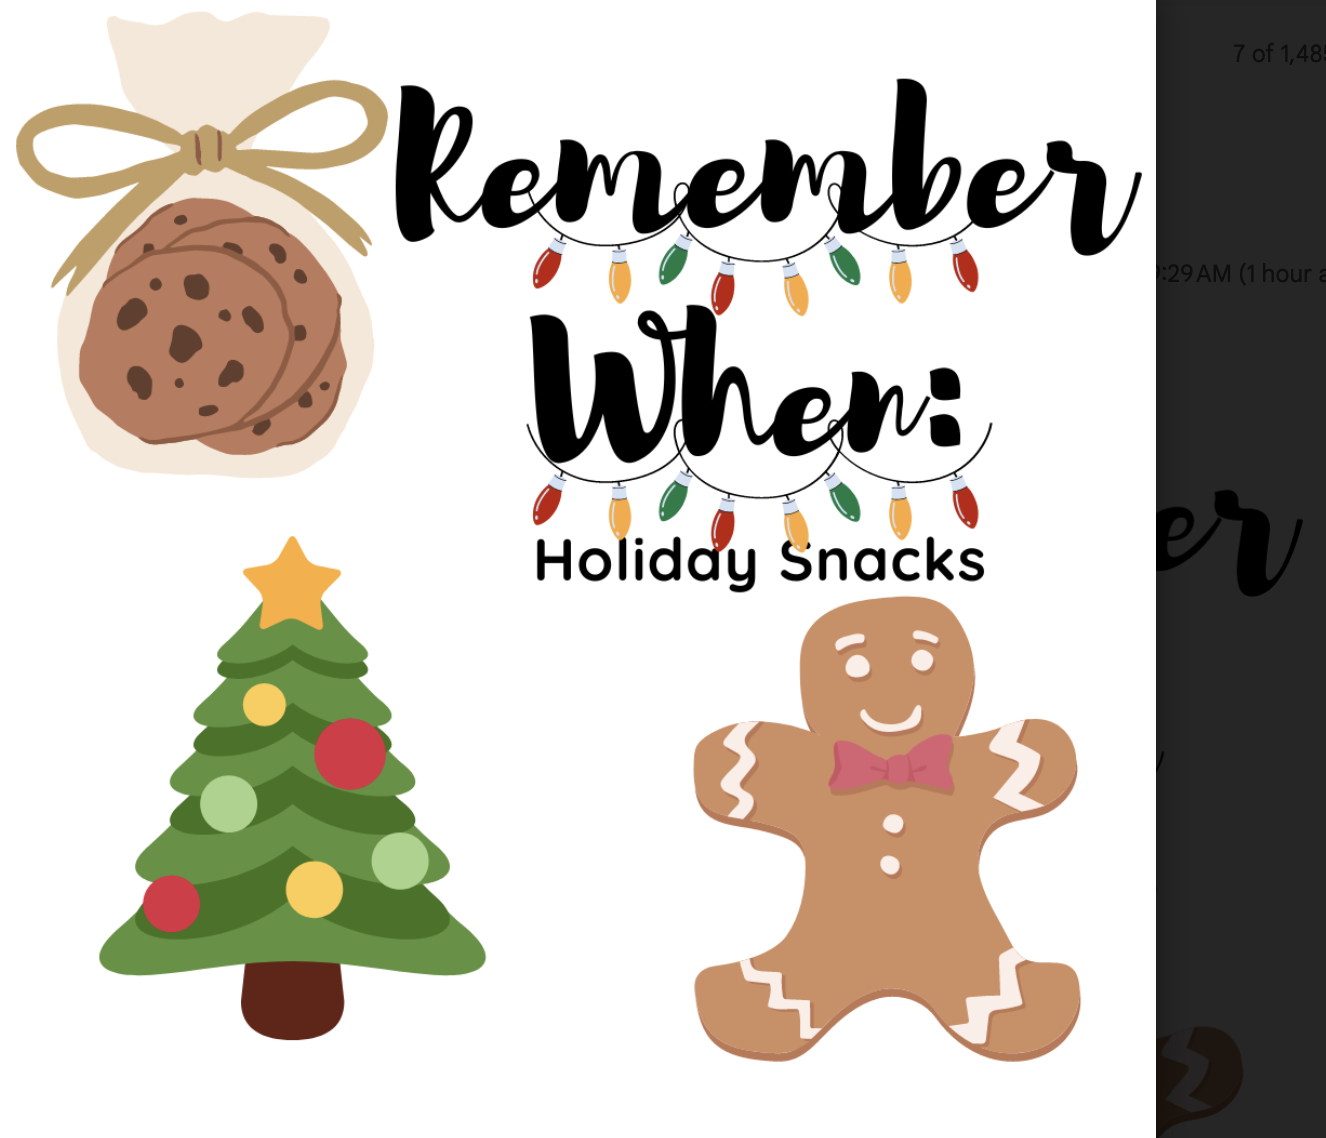 Remember When: Holiday Snacks